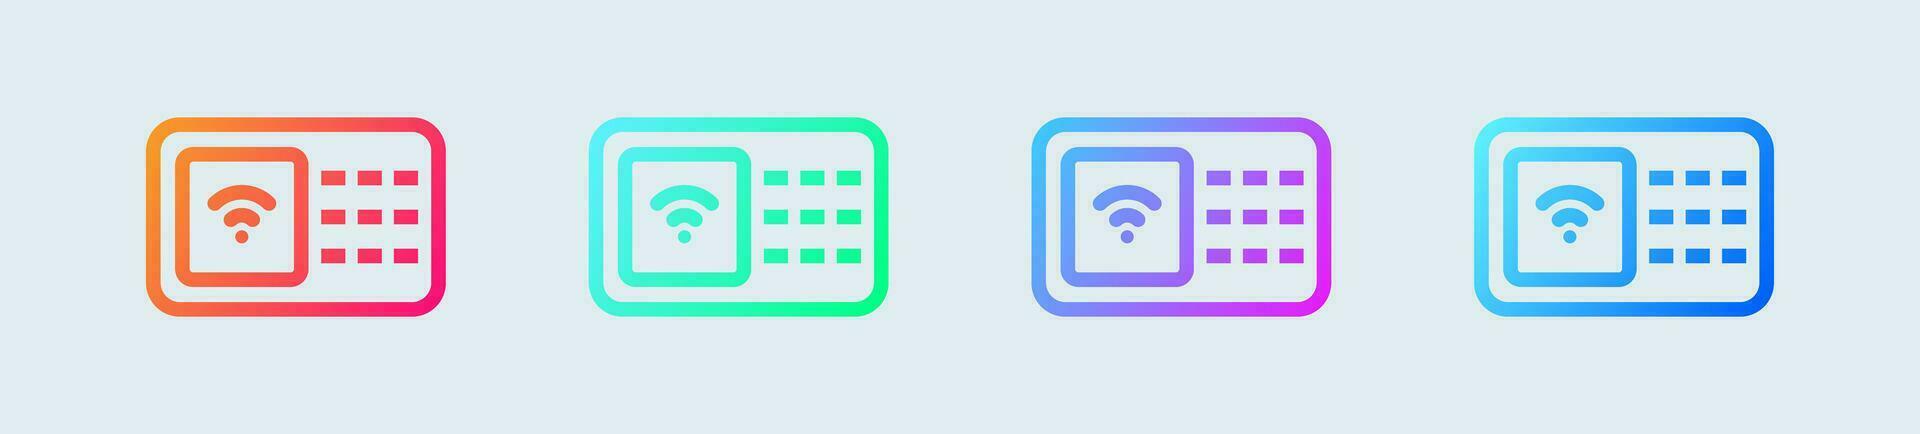 Security code line icon in gradient colors. Password signs vector illustration.